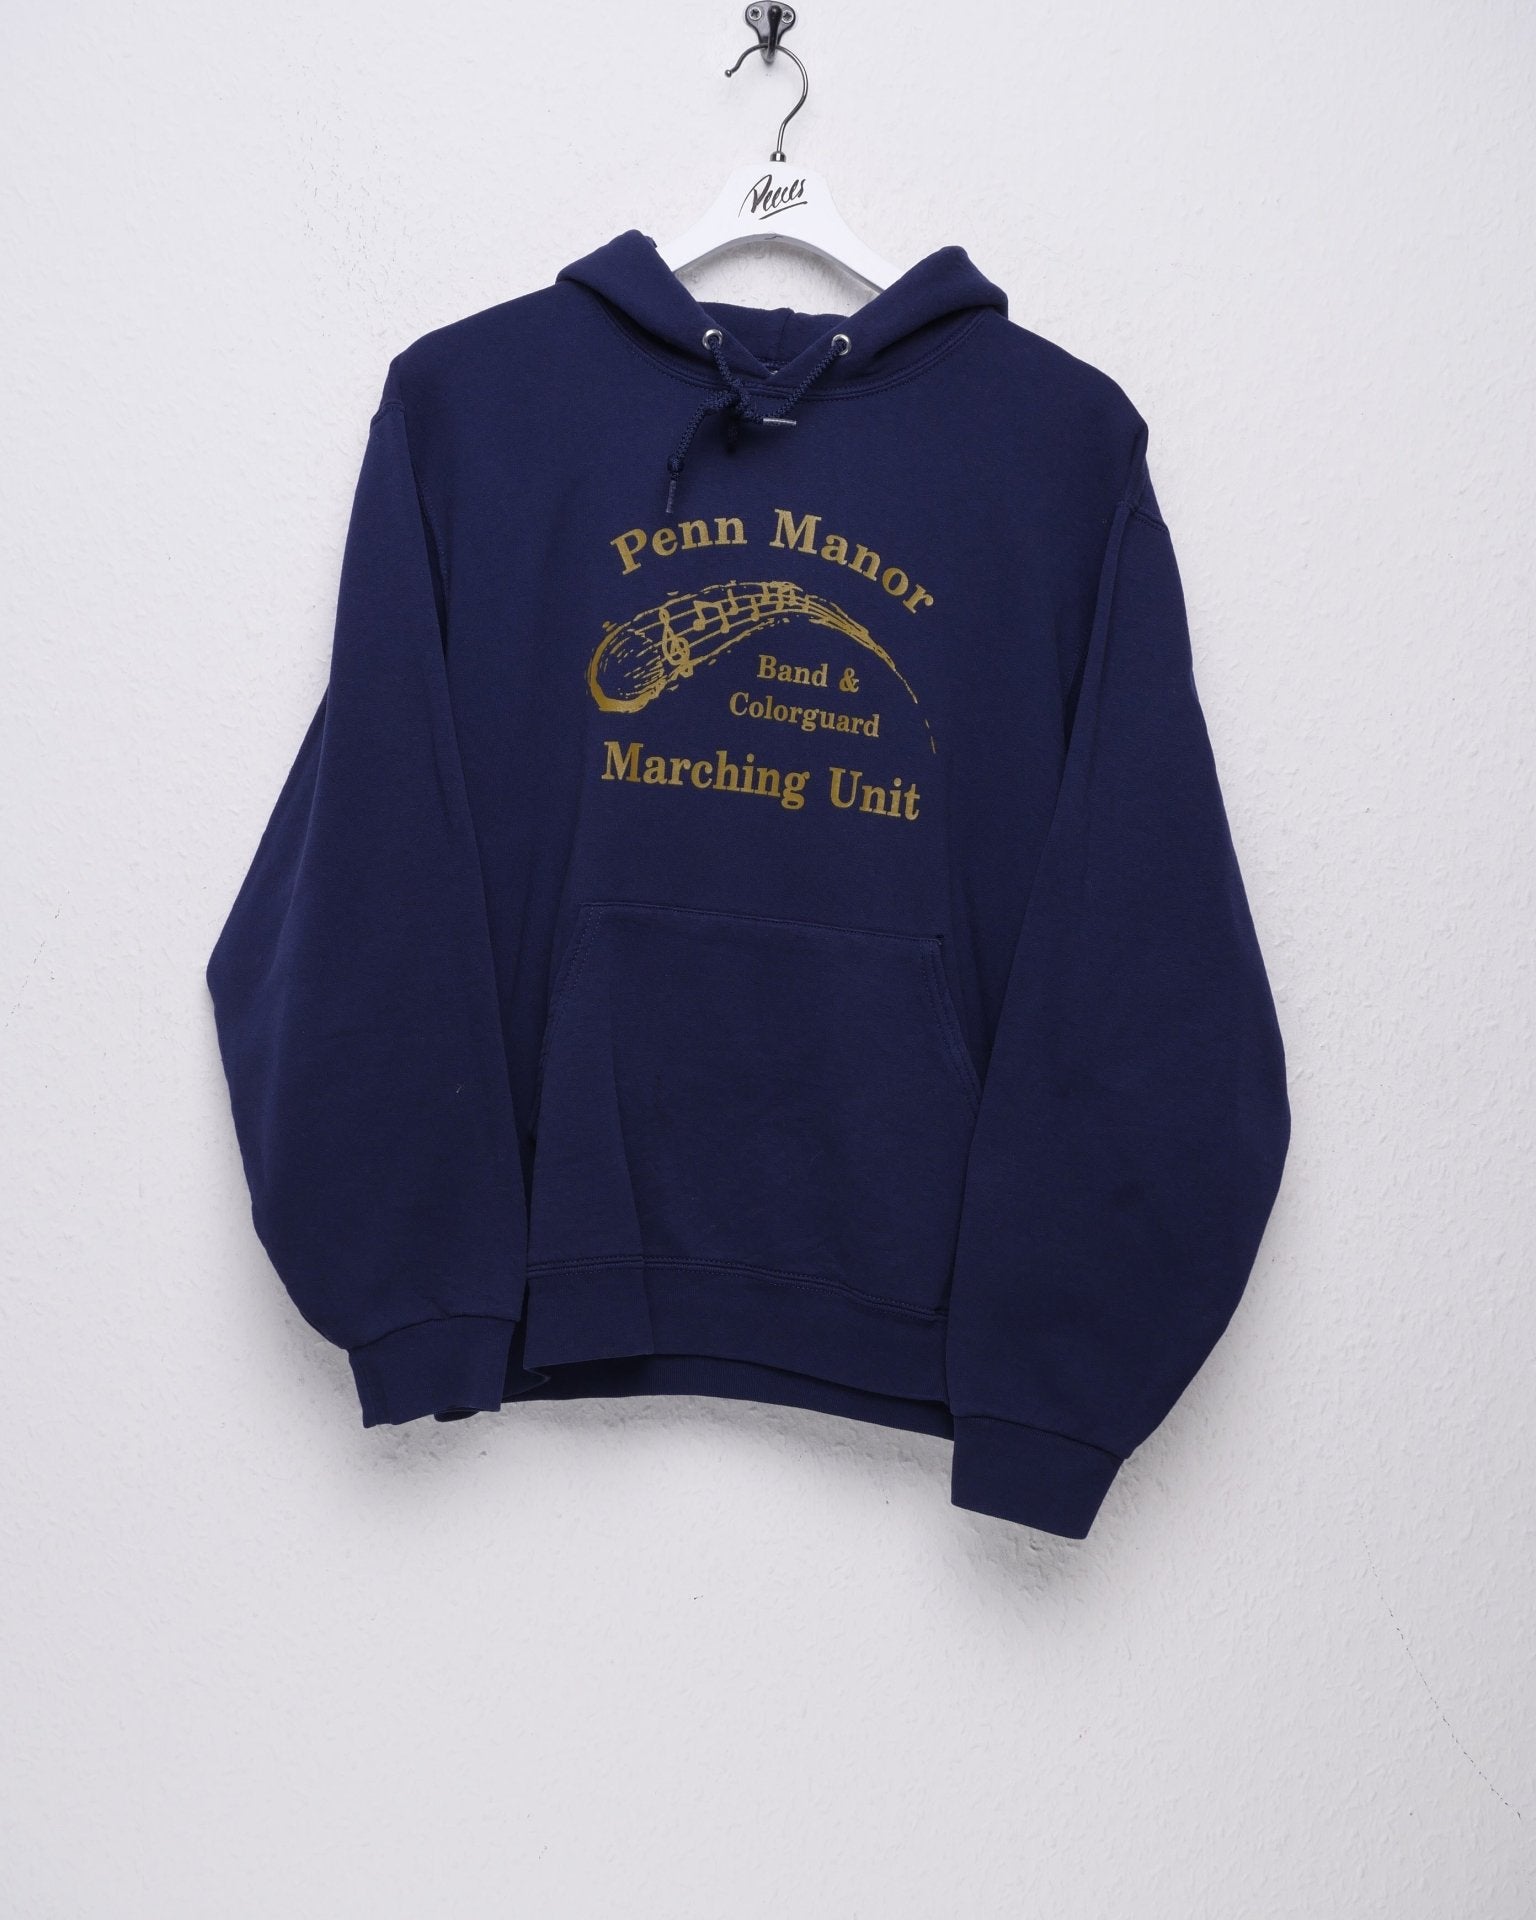 'Penn Manor Marching Unit' printed Graphic navy Hoodie - Peeces